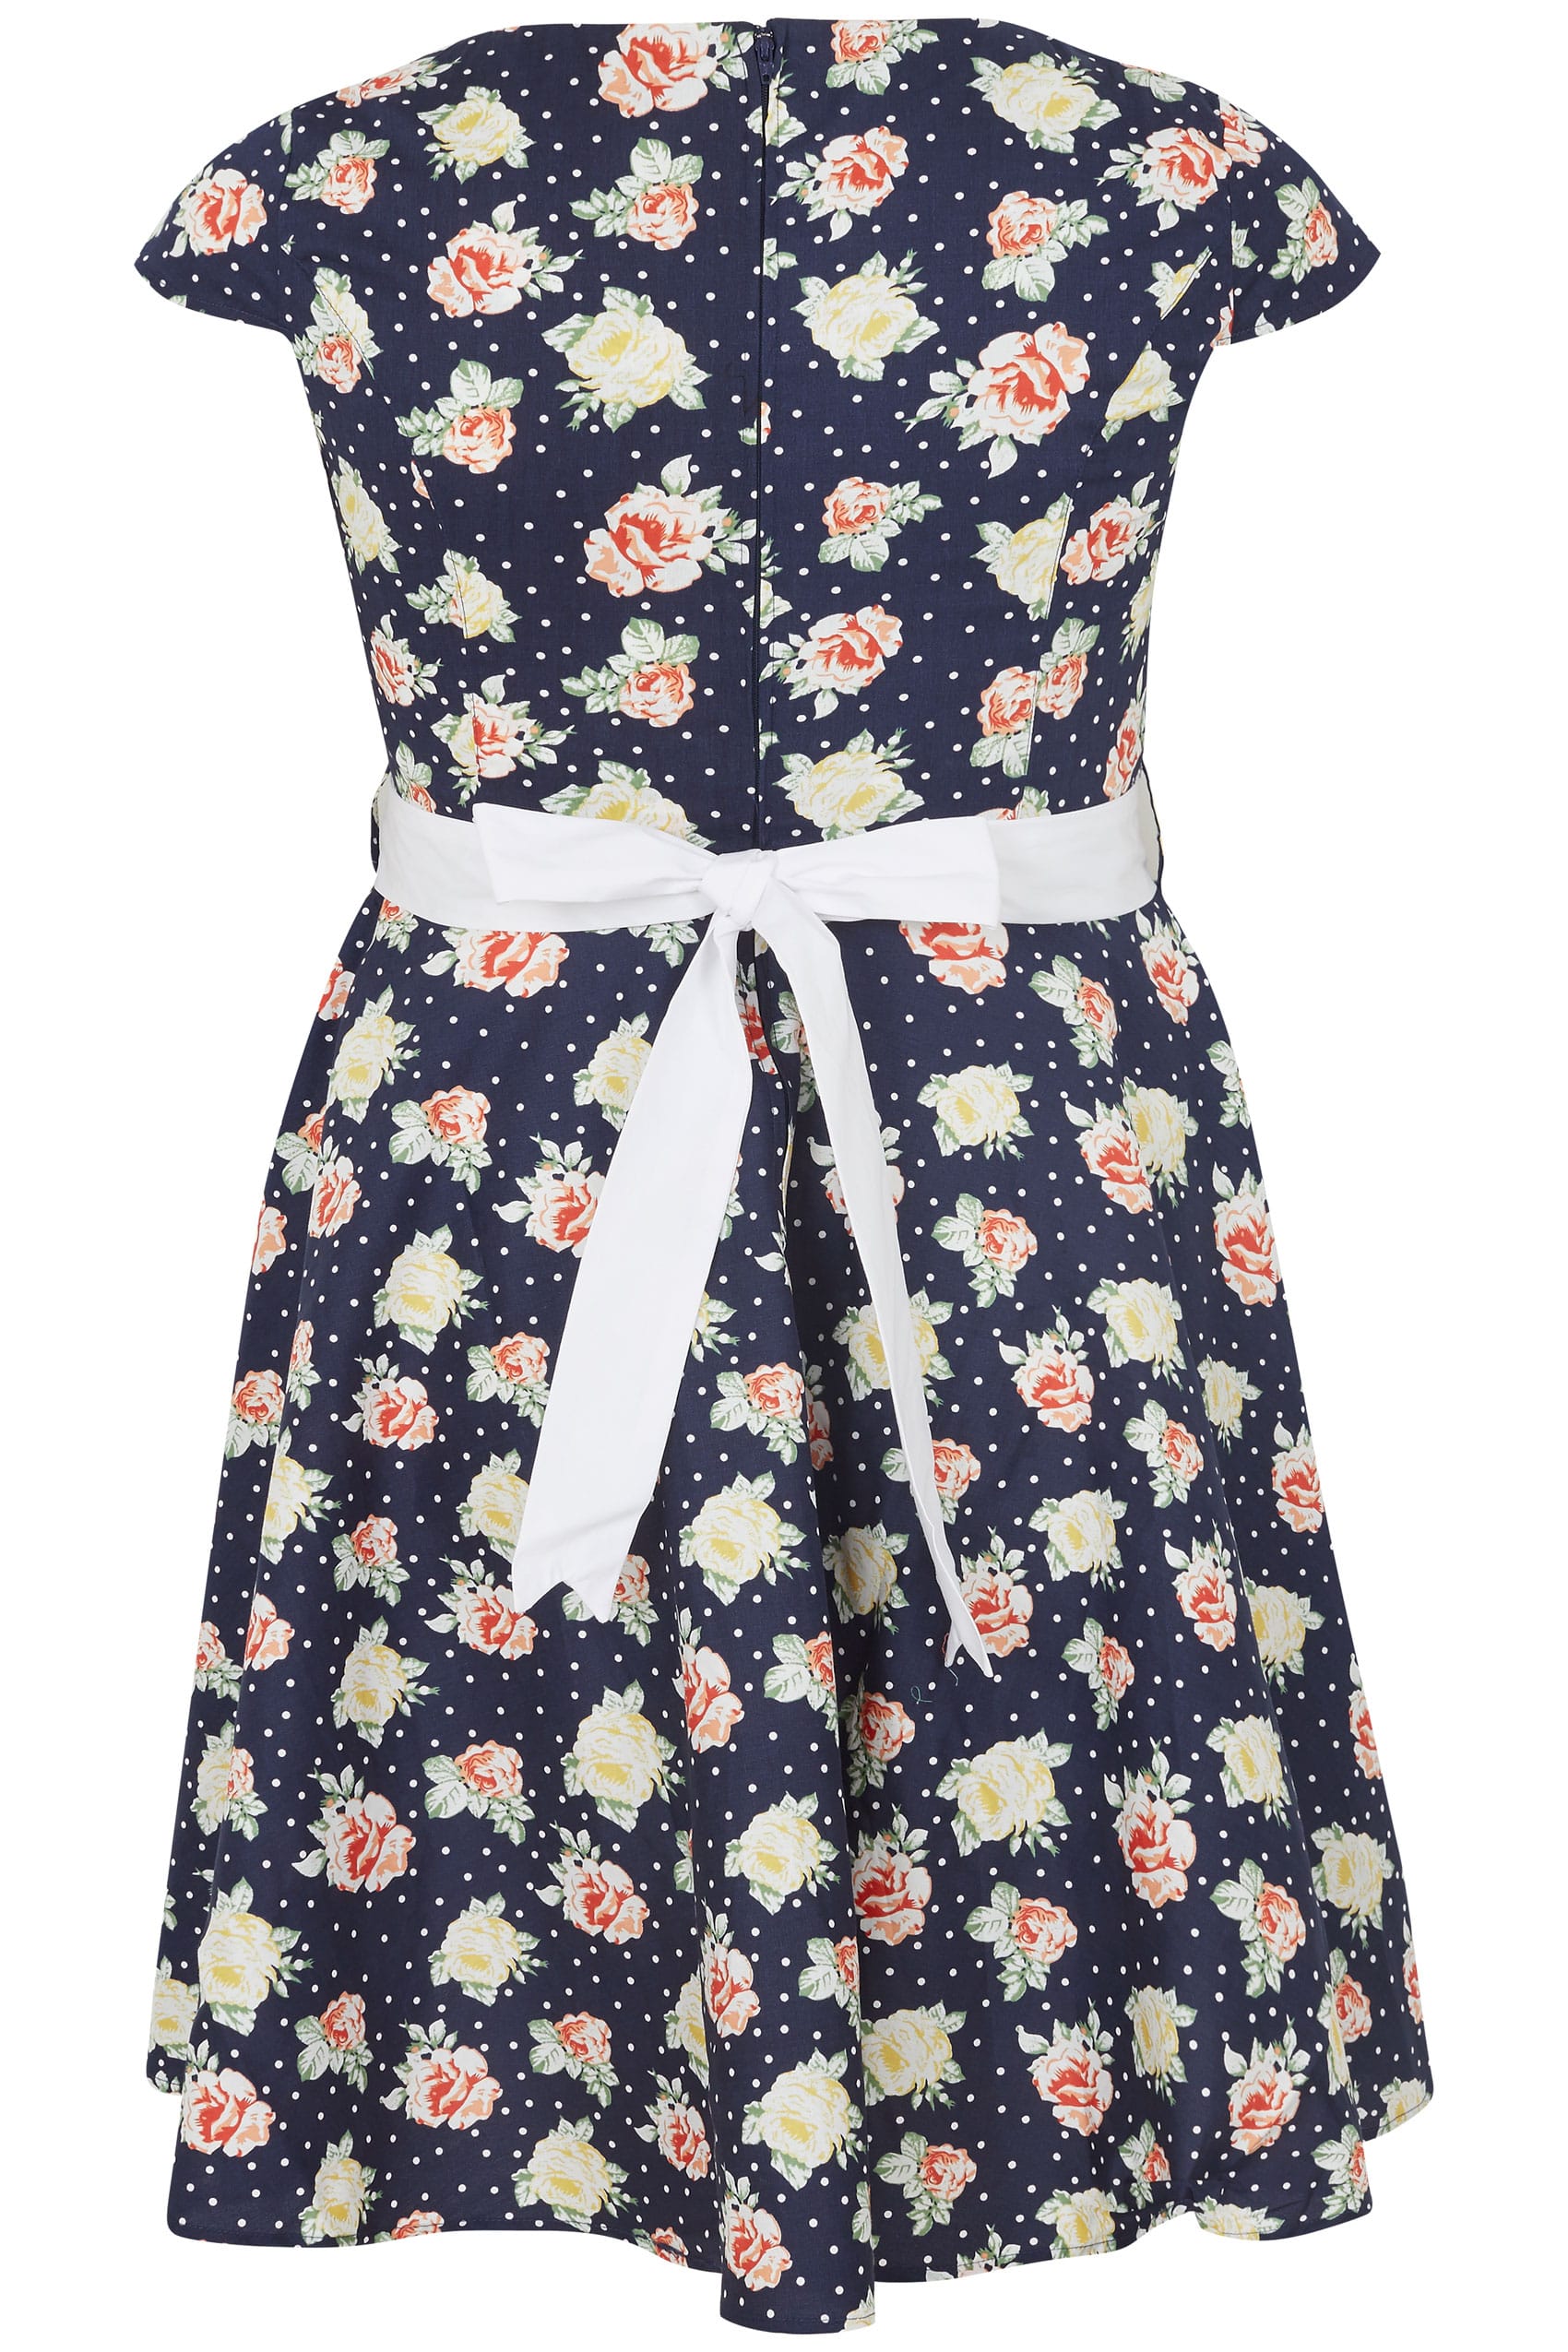 HELL BUNNY Navy Floral Print Cassie Dress With Self Tie Waist, plus ...